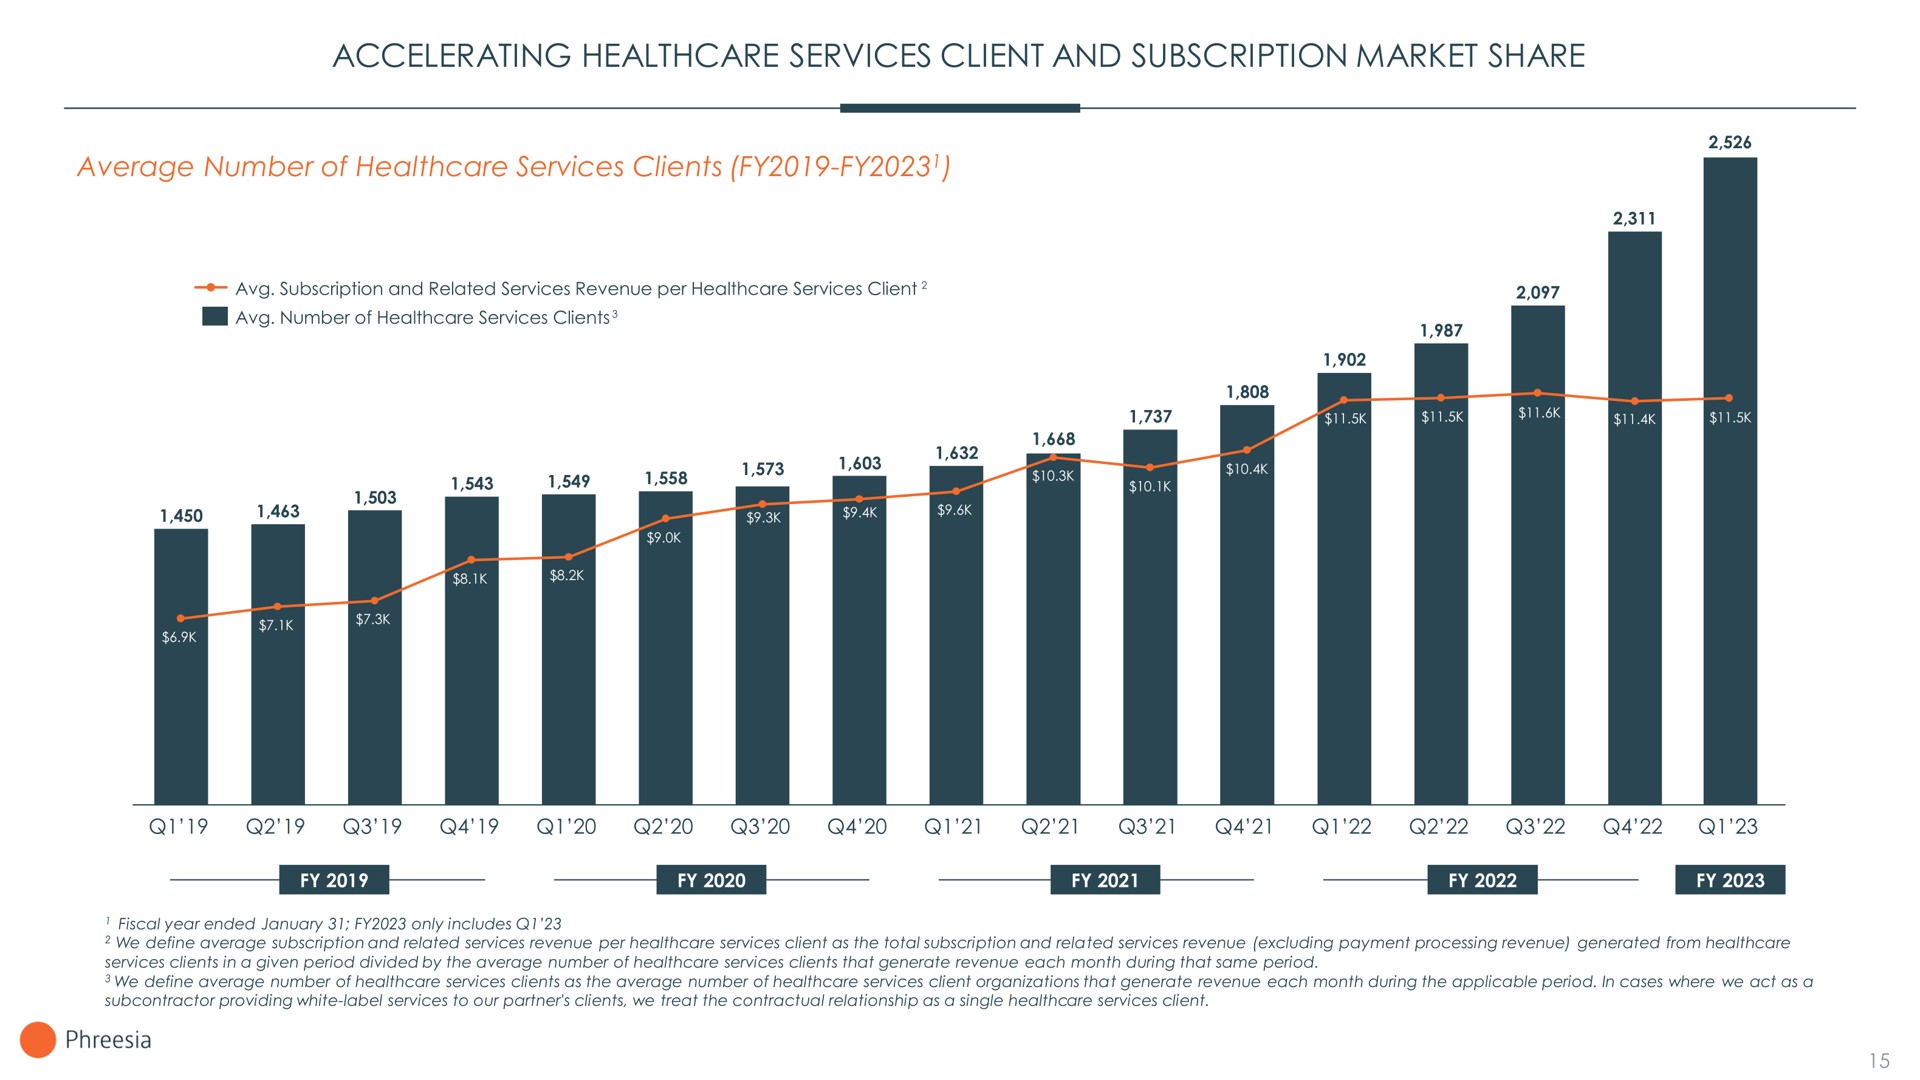 accelerating services client and subscription market share in | Phreesia